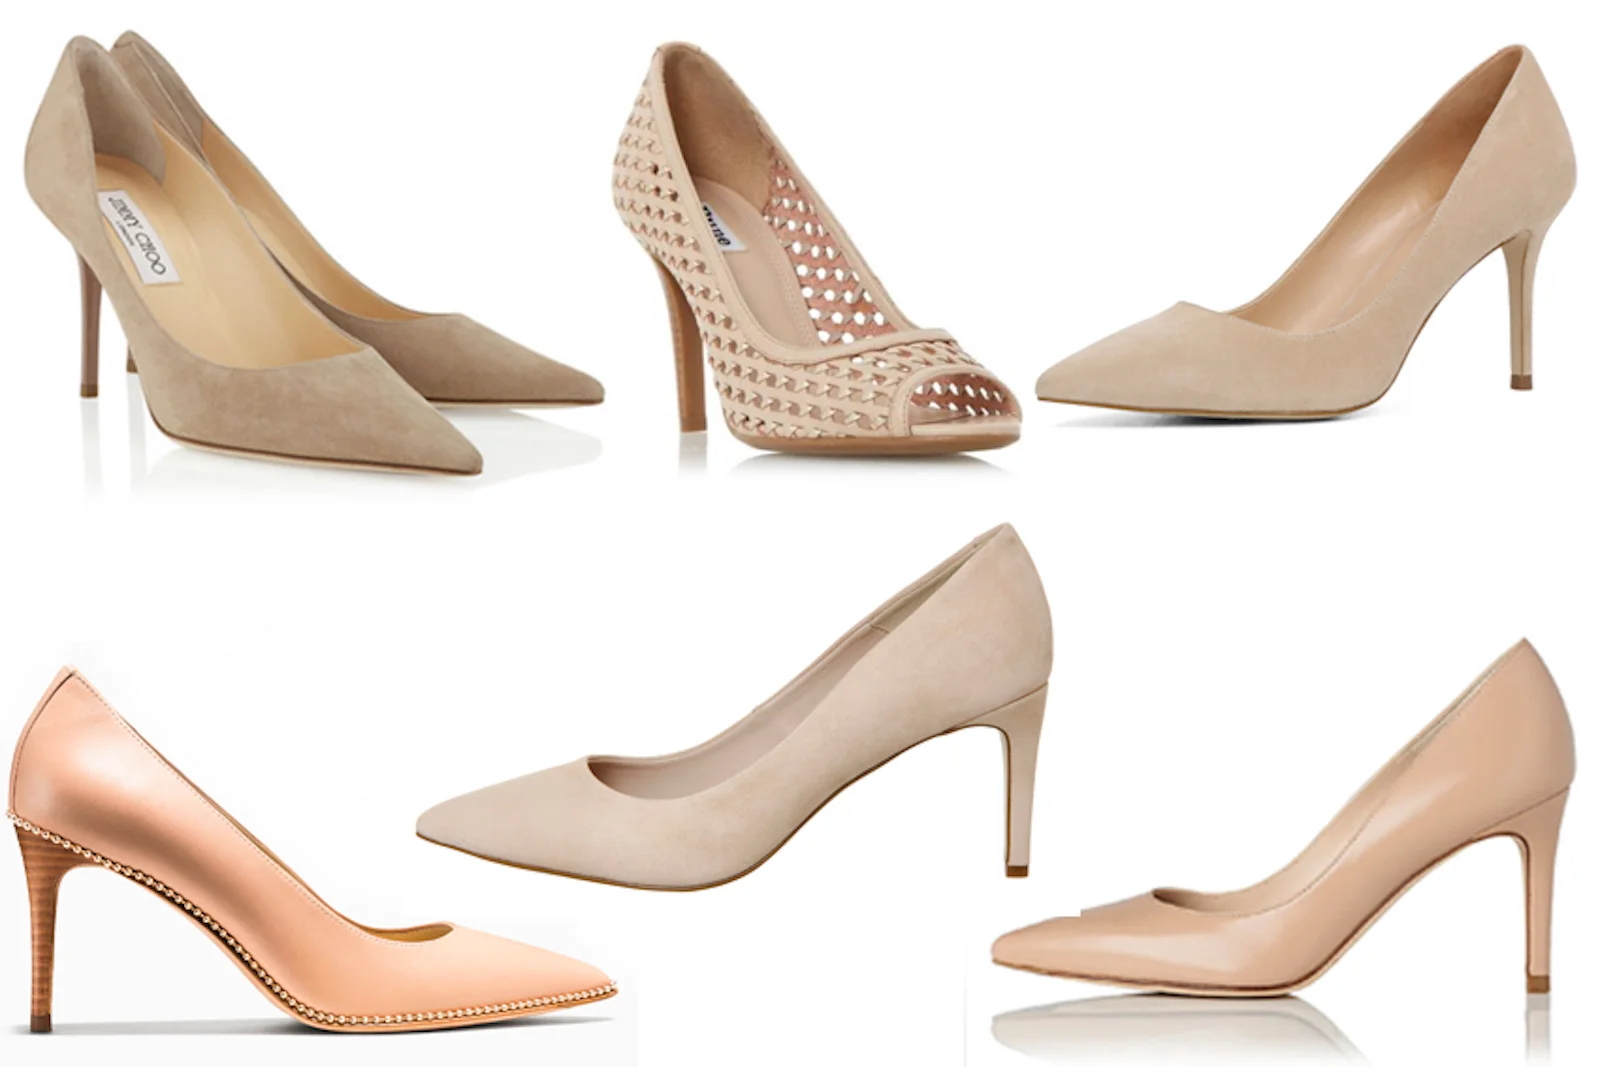 Weekly Window Shop: The Best Nude Court Shoes